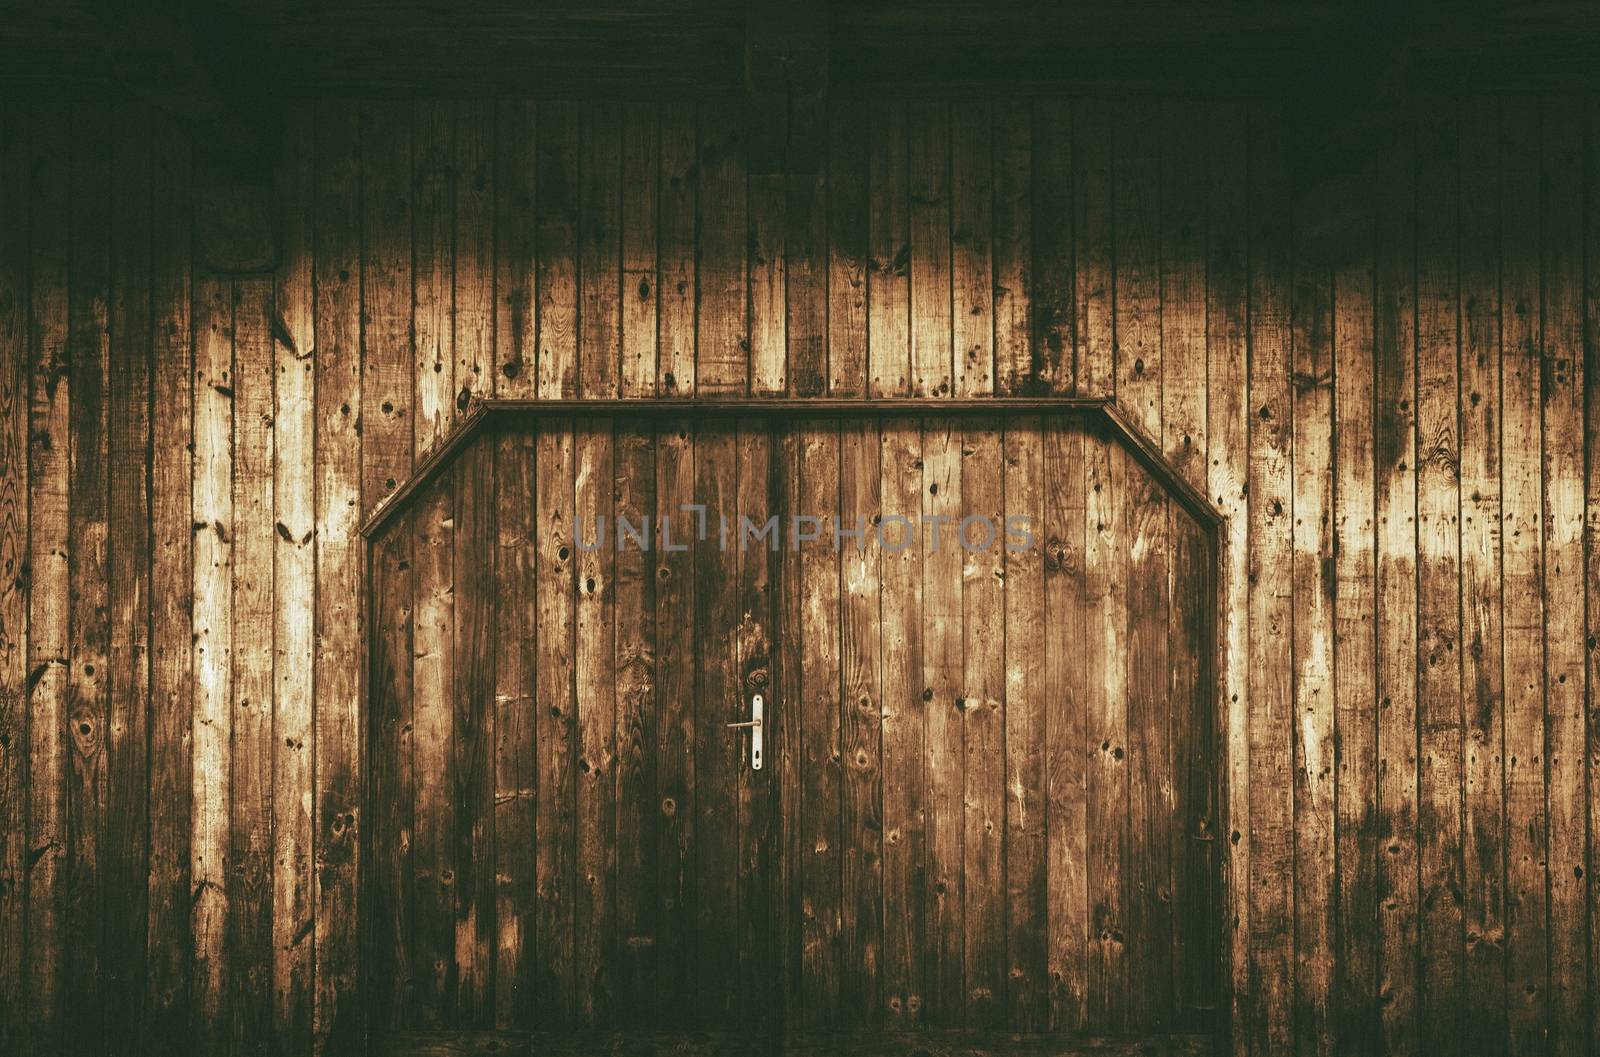 Old Wooden Gate with Doors. Aged Wood Barn Wall.